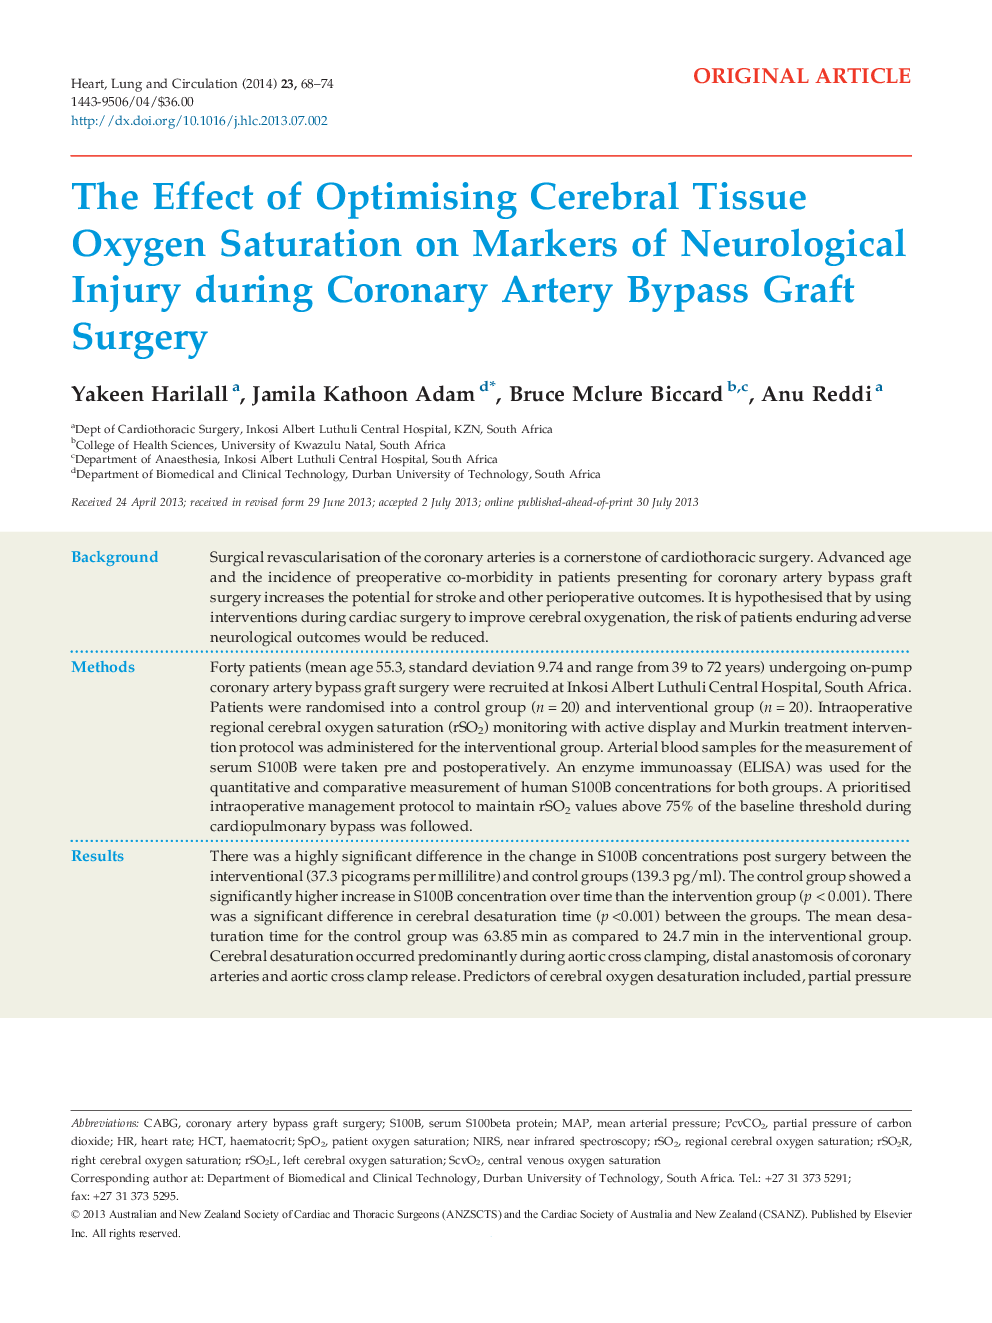 The Effect of Optimising Cerebral Tissue Oxygen Saturation on Markers of Neurological Injury during Coronary Artery Bypass Graft Surgery